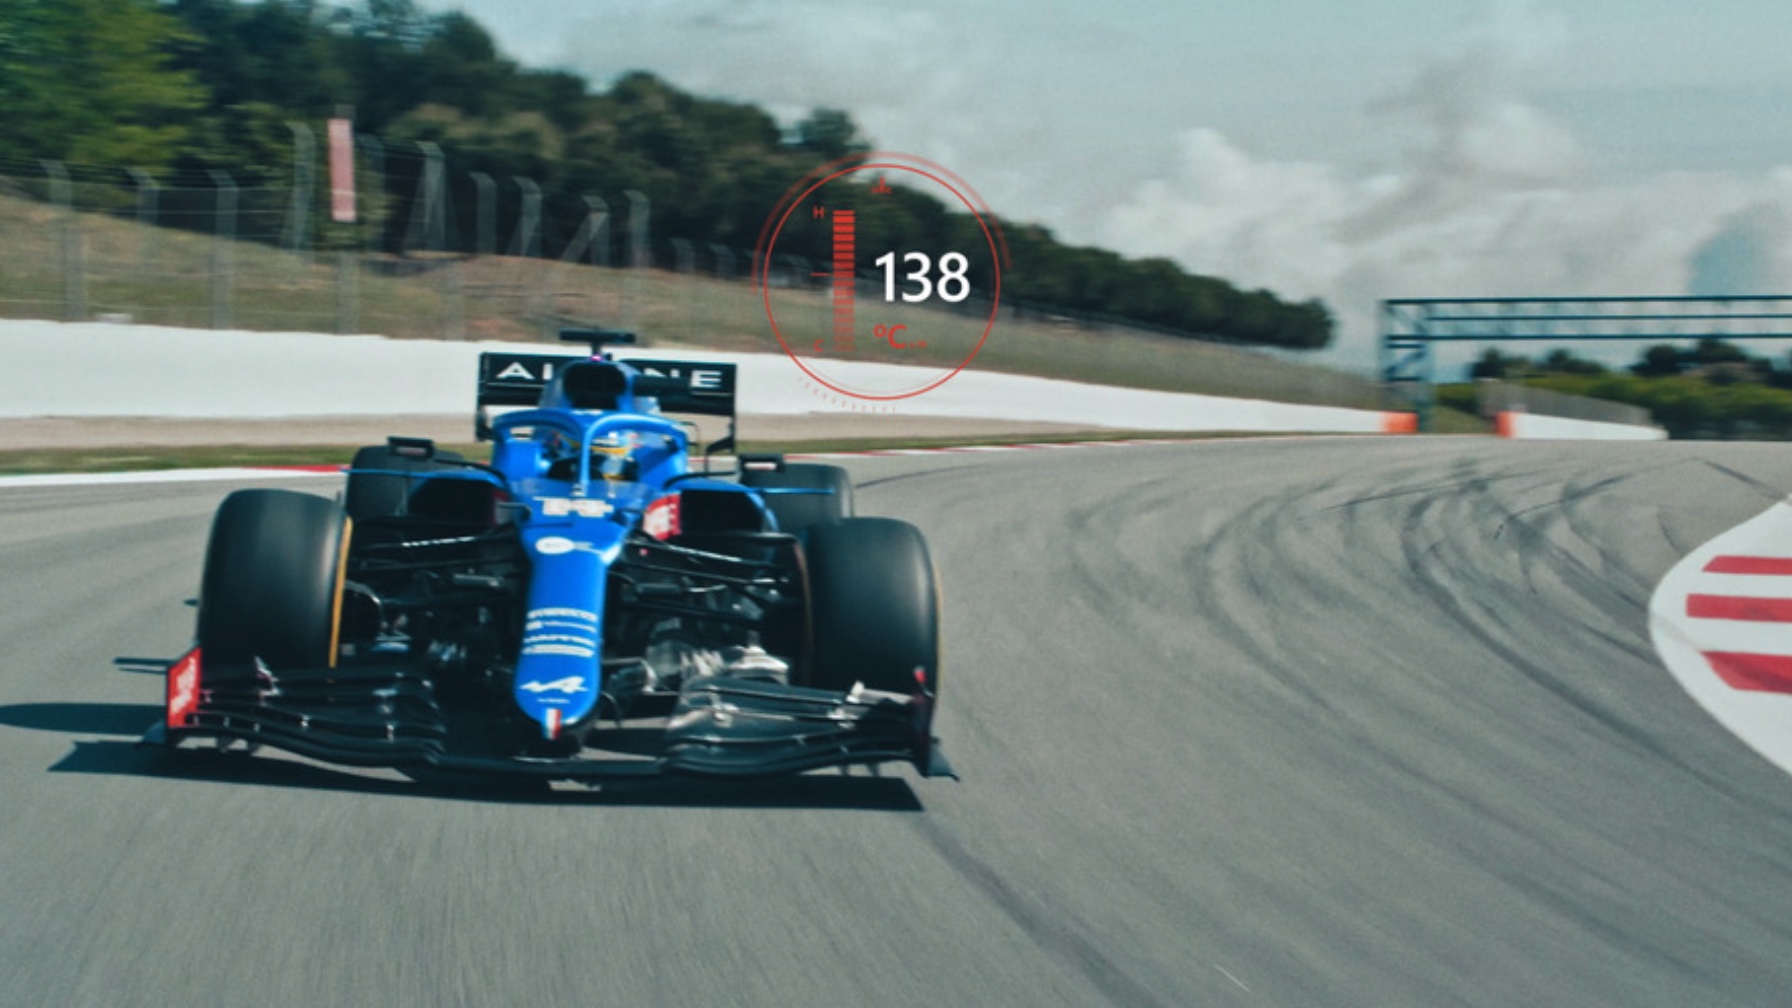 As soon as the Alpine F1 Team car hits the track, billions of data points are tracked and collected. The team is able to use the data to determine whether there is a problem with the car and take further action.​